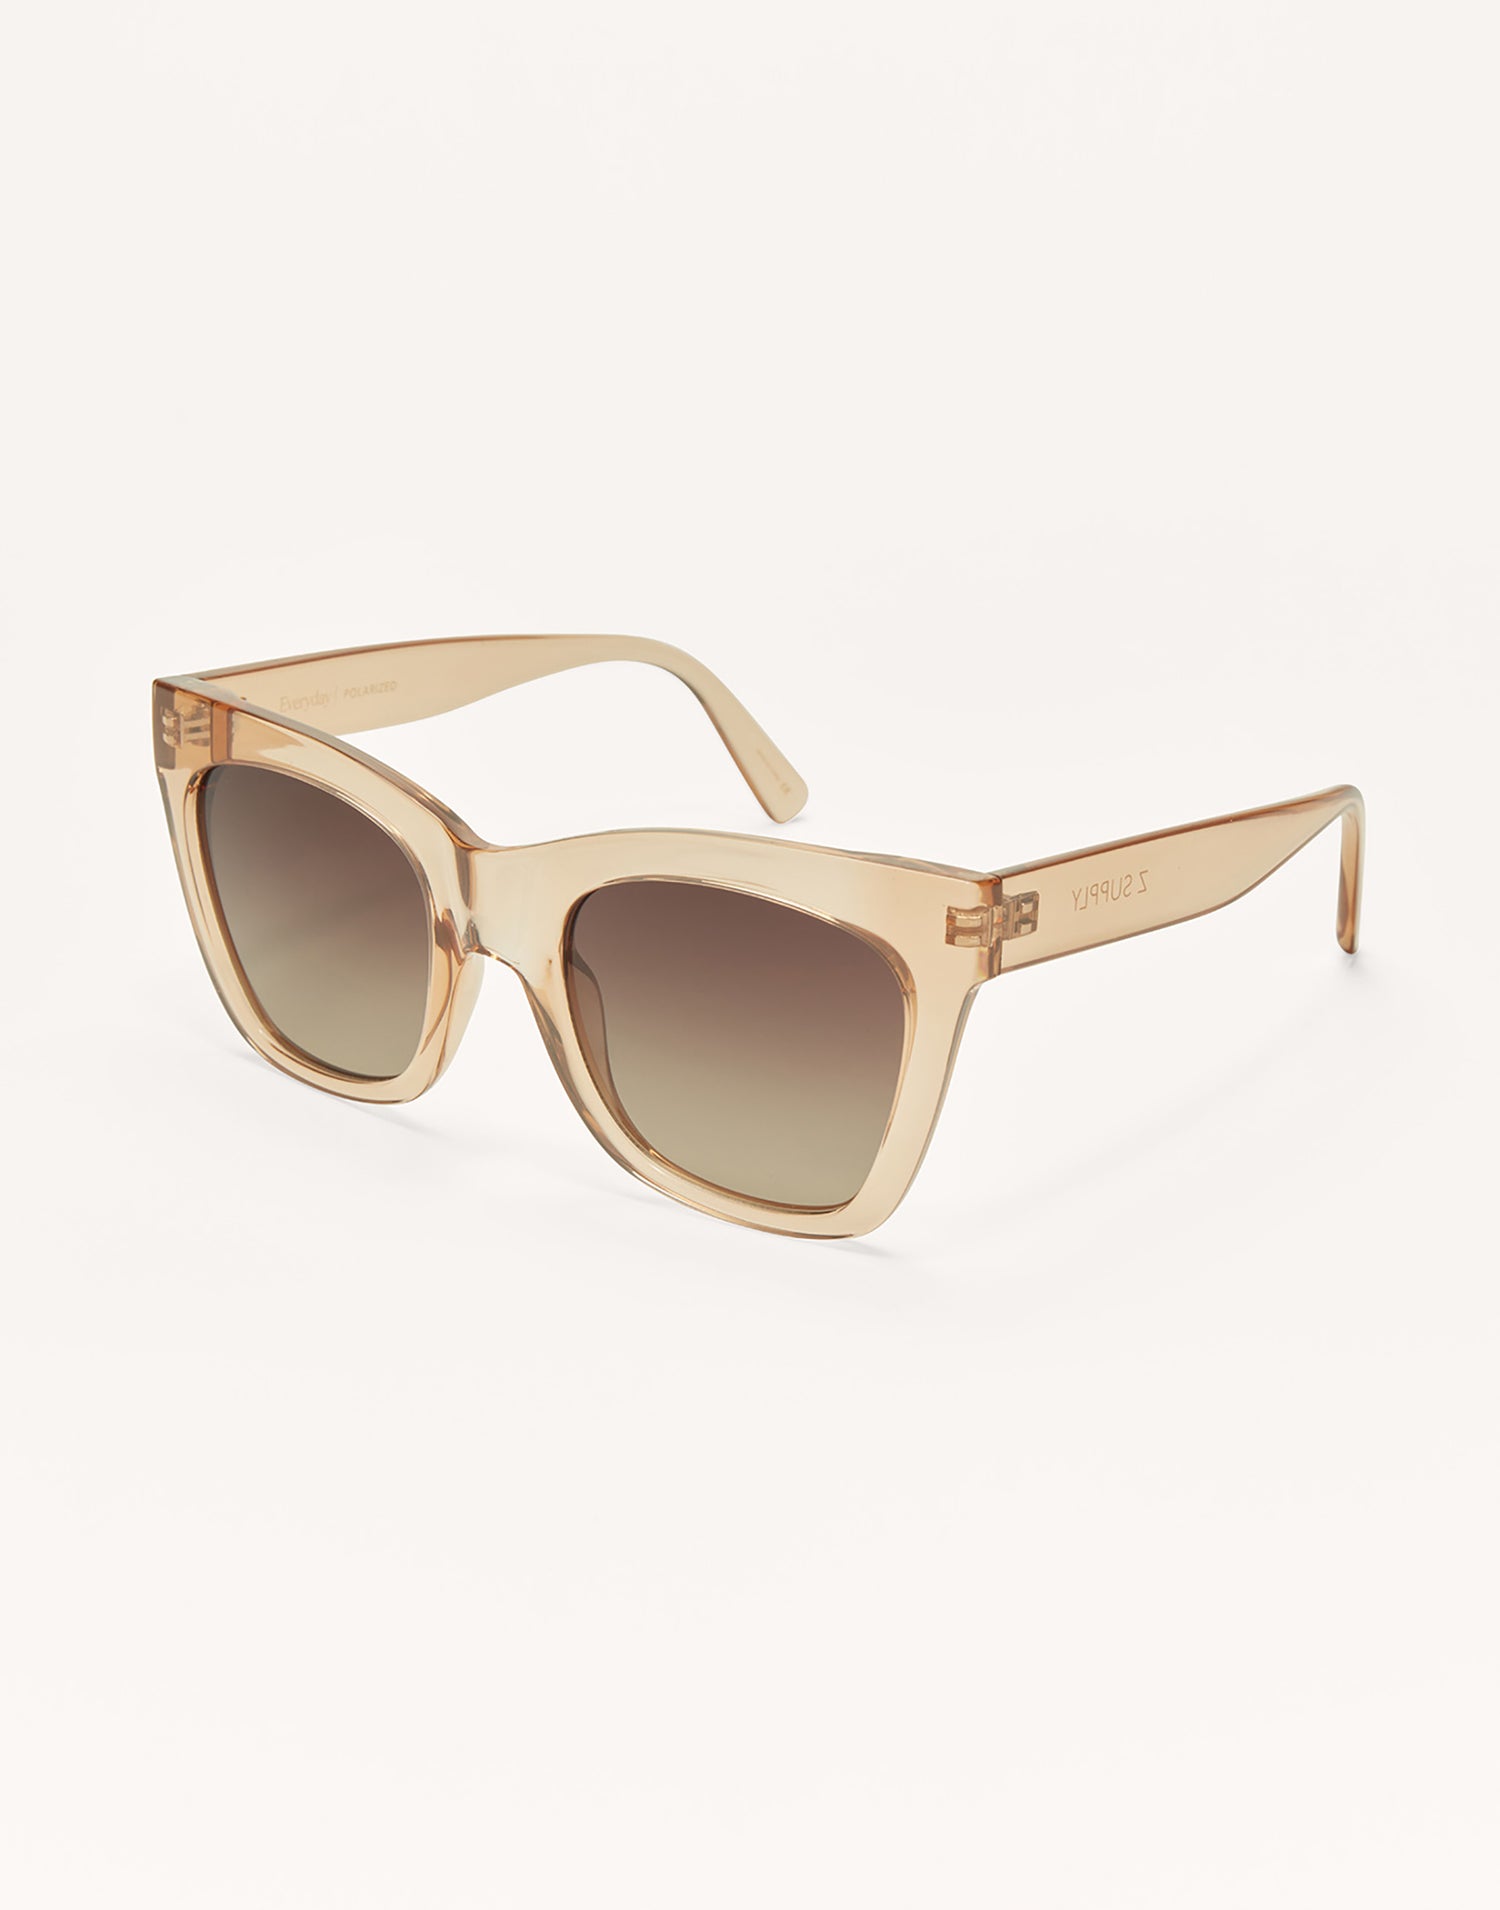 Everyday Sunglasses by Z Supply in Champagne - Angled View